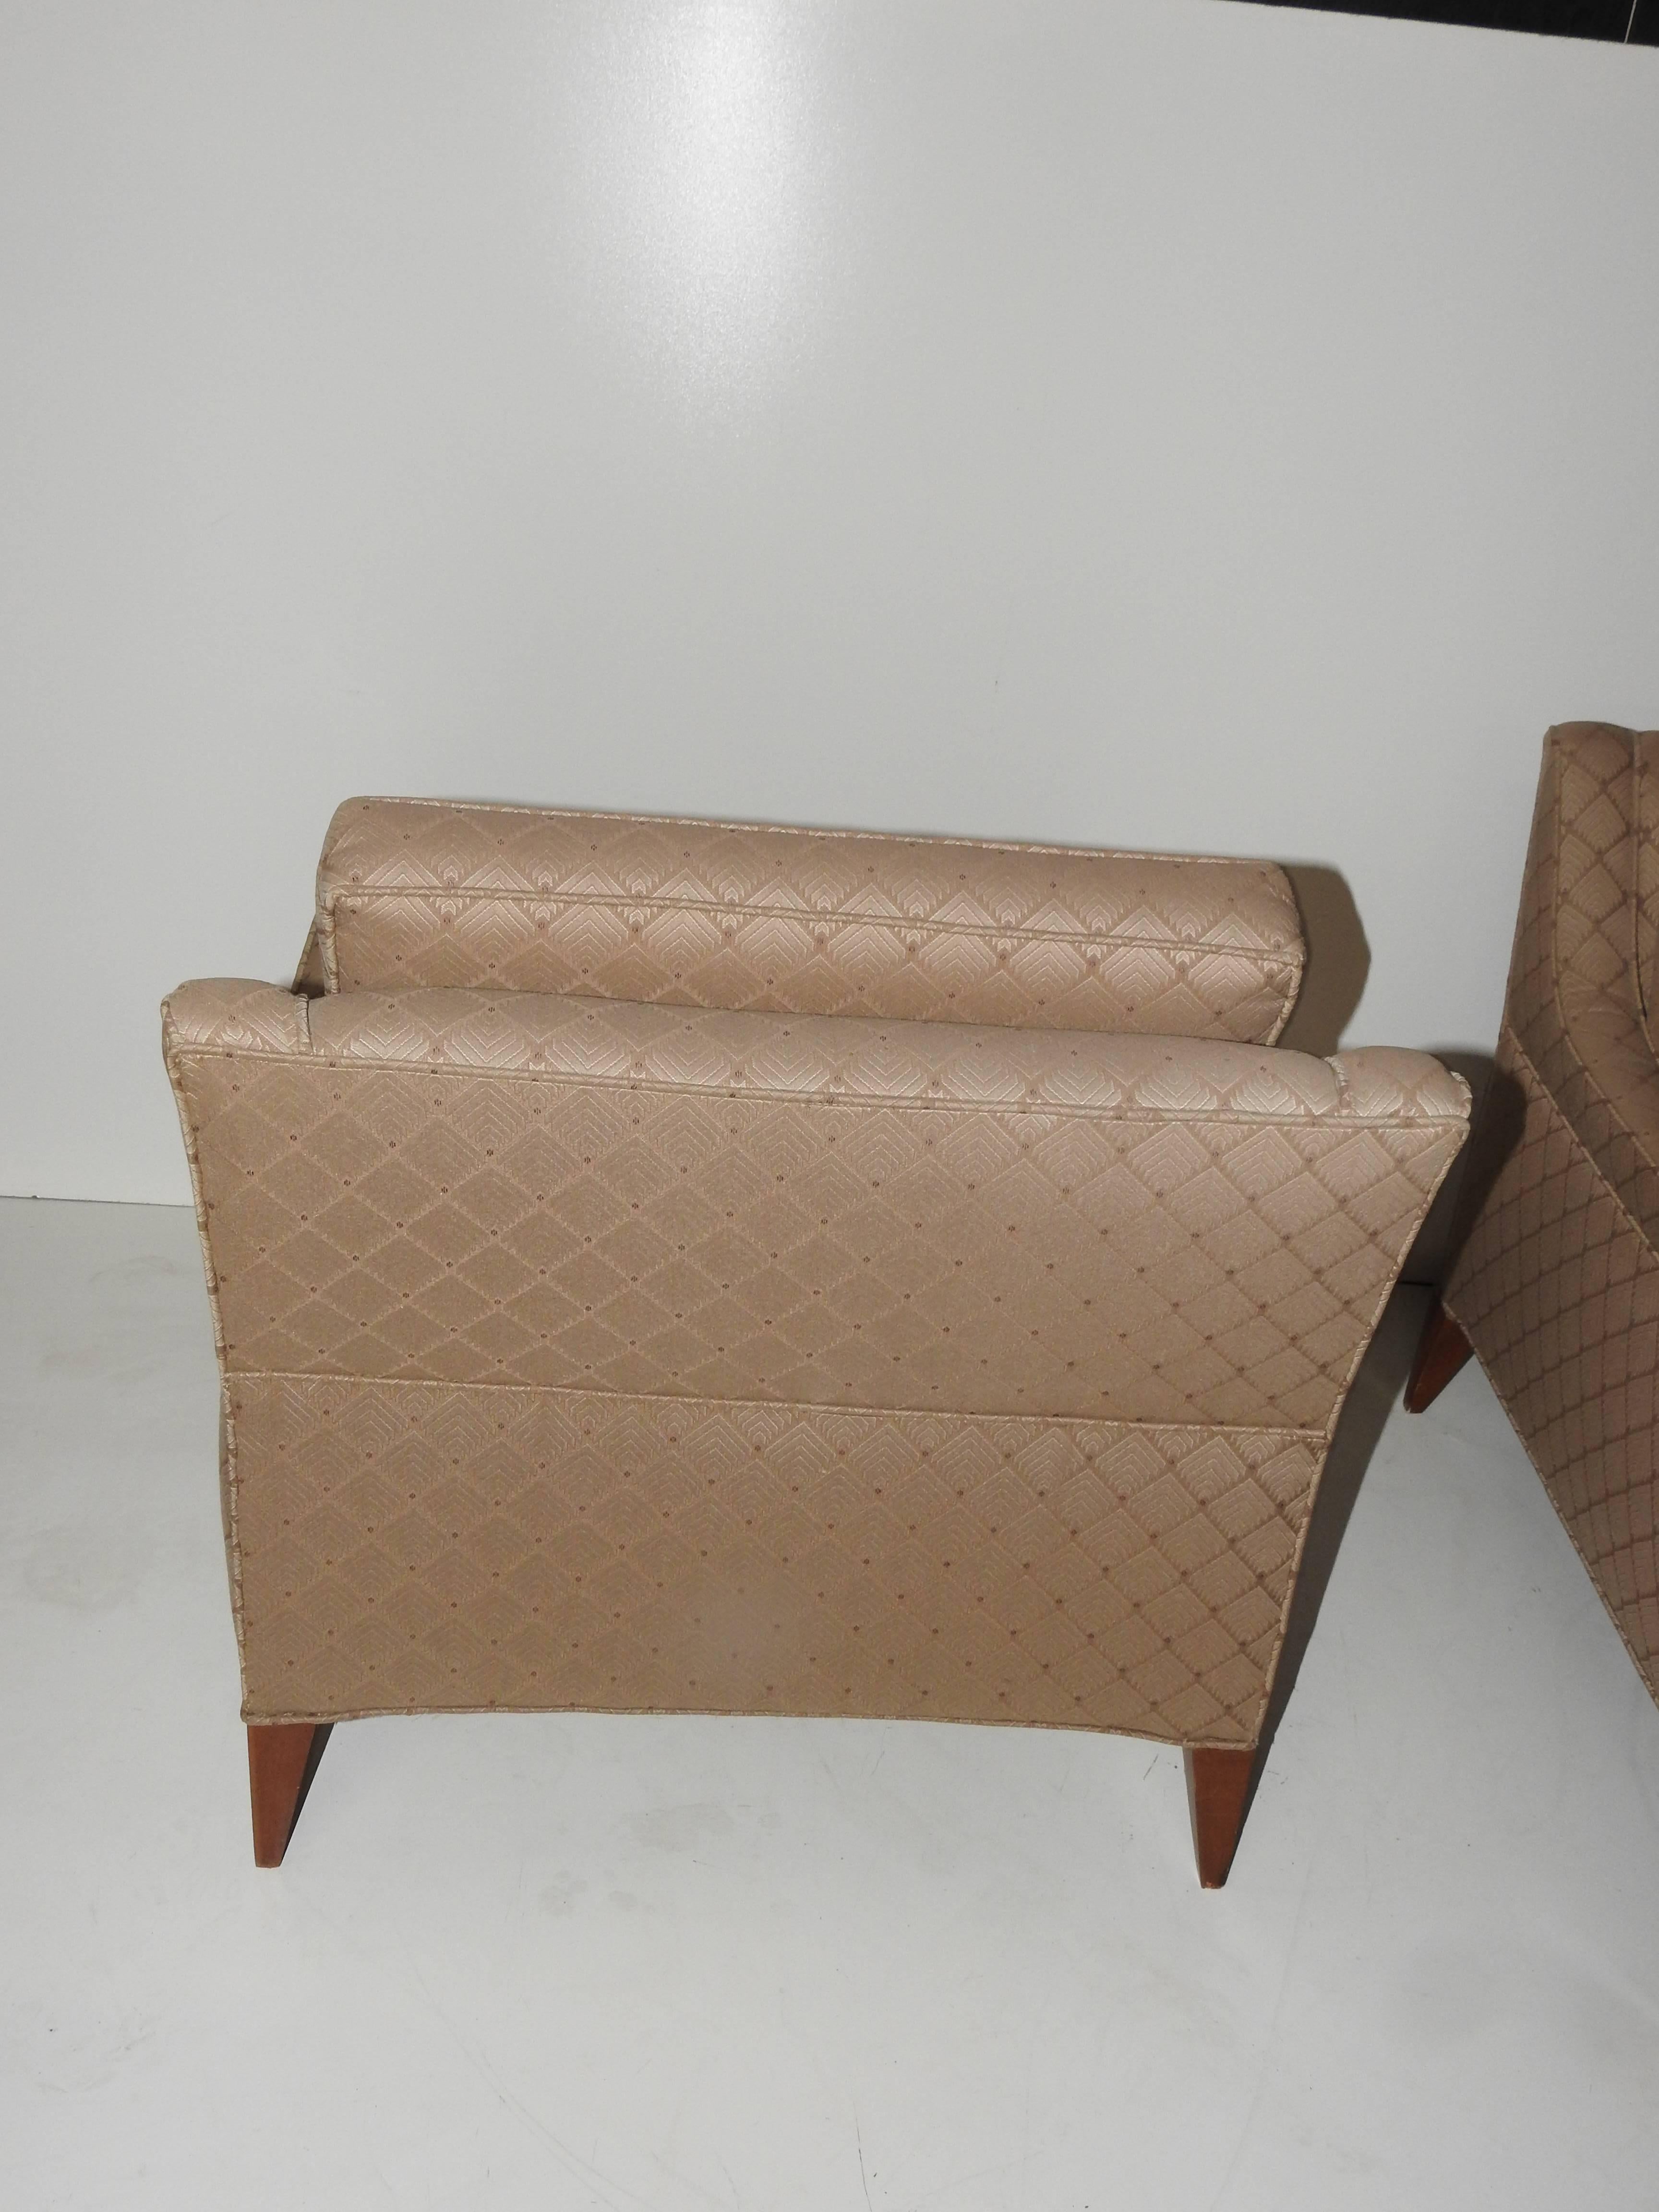 Pair of Mid-Century Modern Club Chairs by Dunbar In Good Condition For Sale In Philadelphia, PA